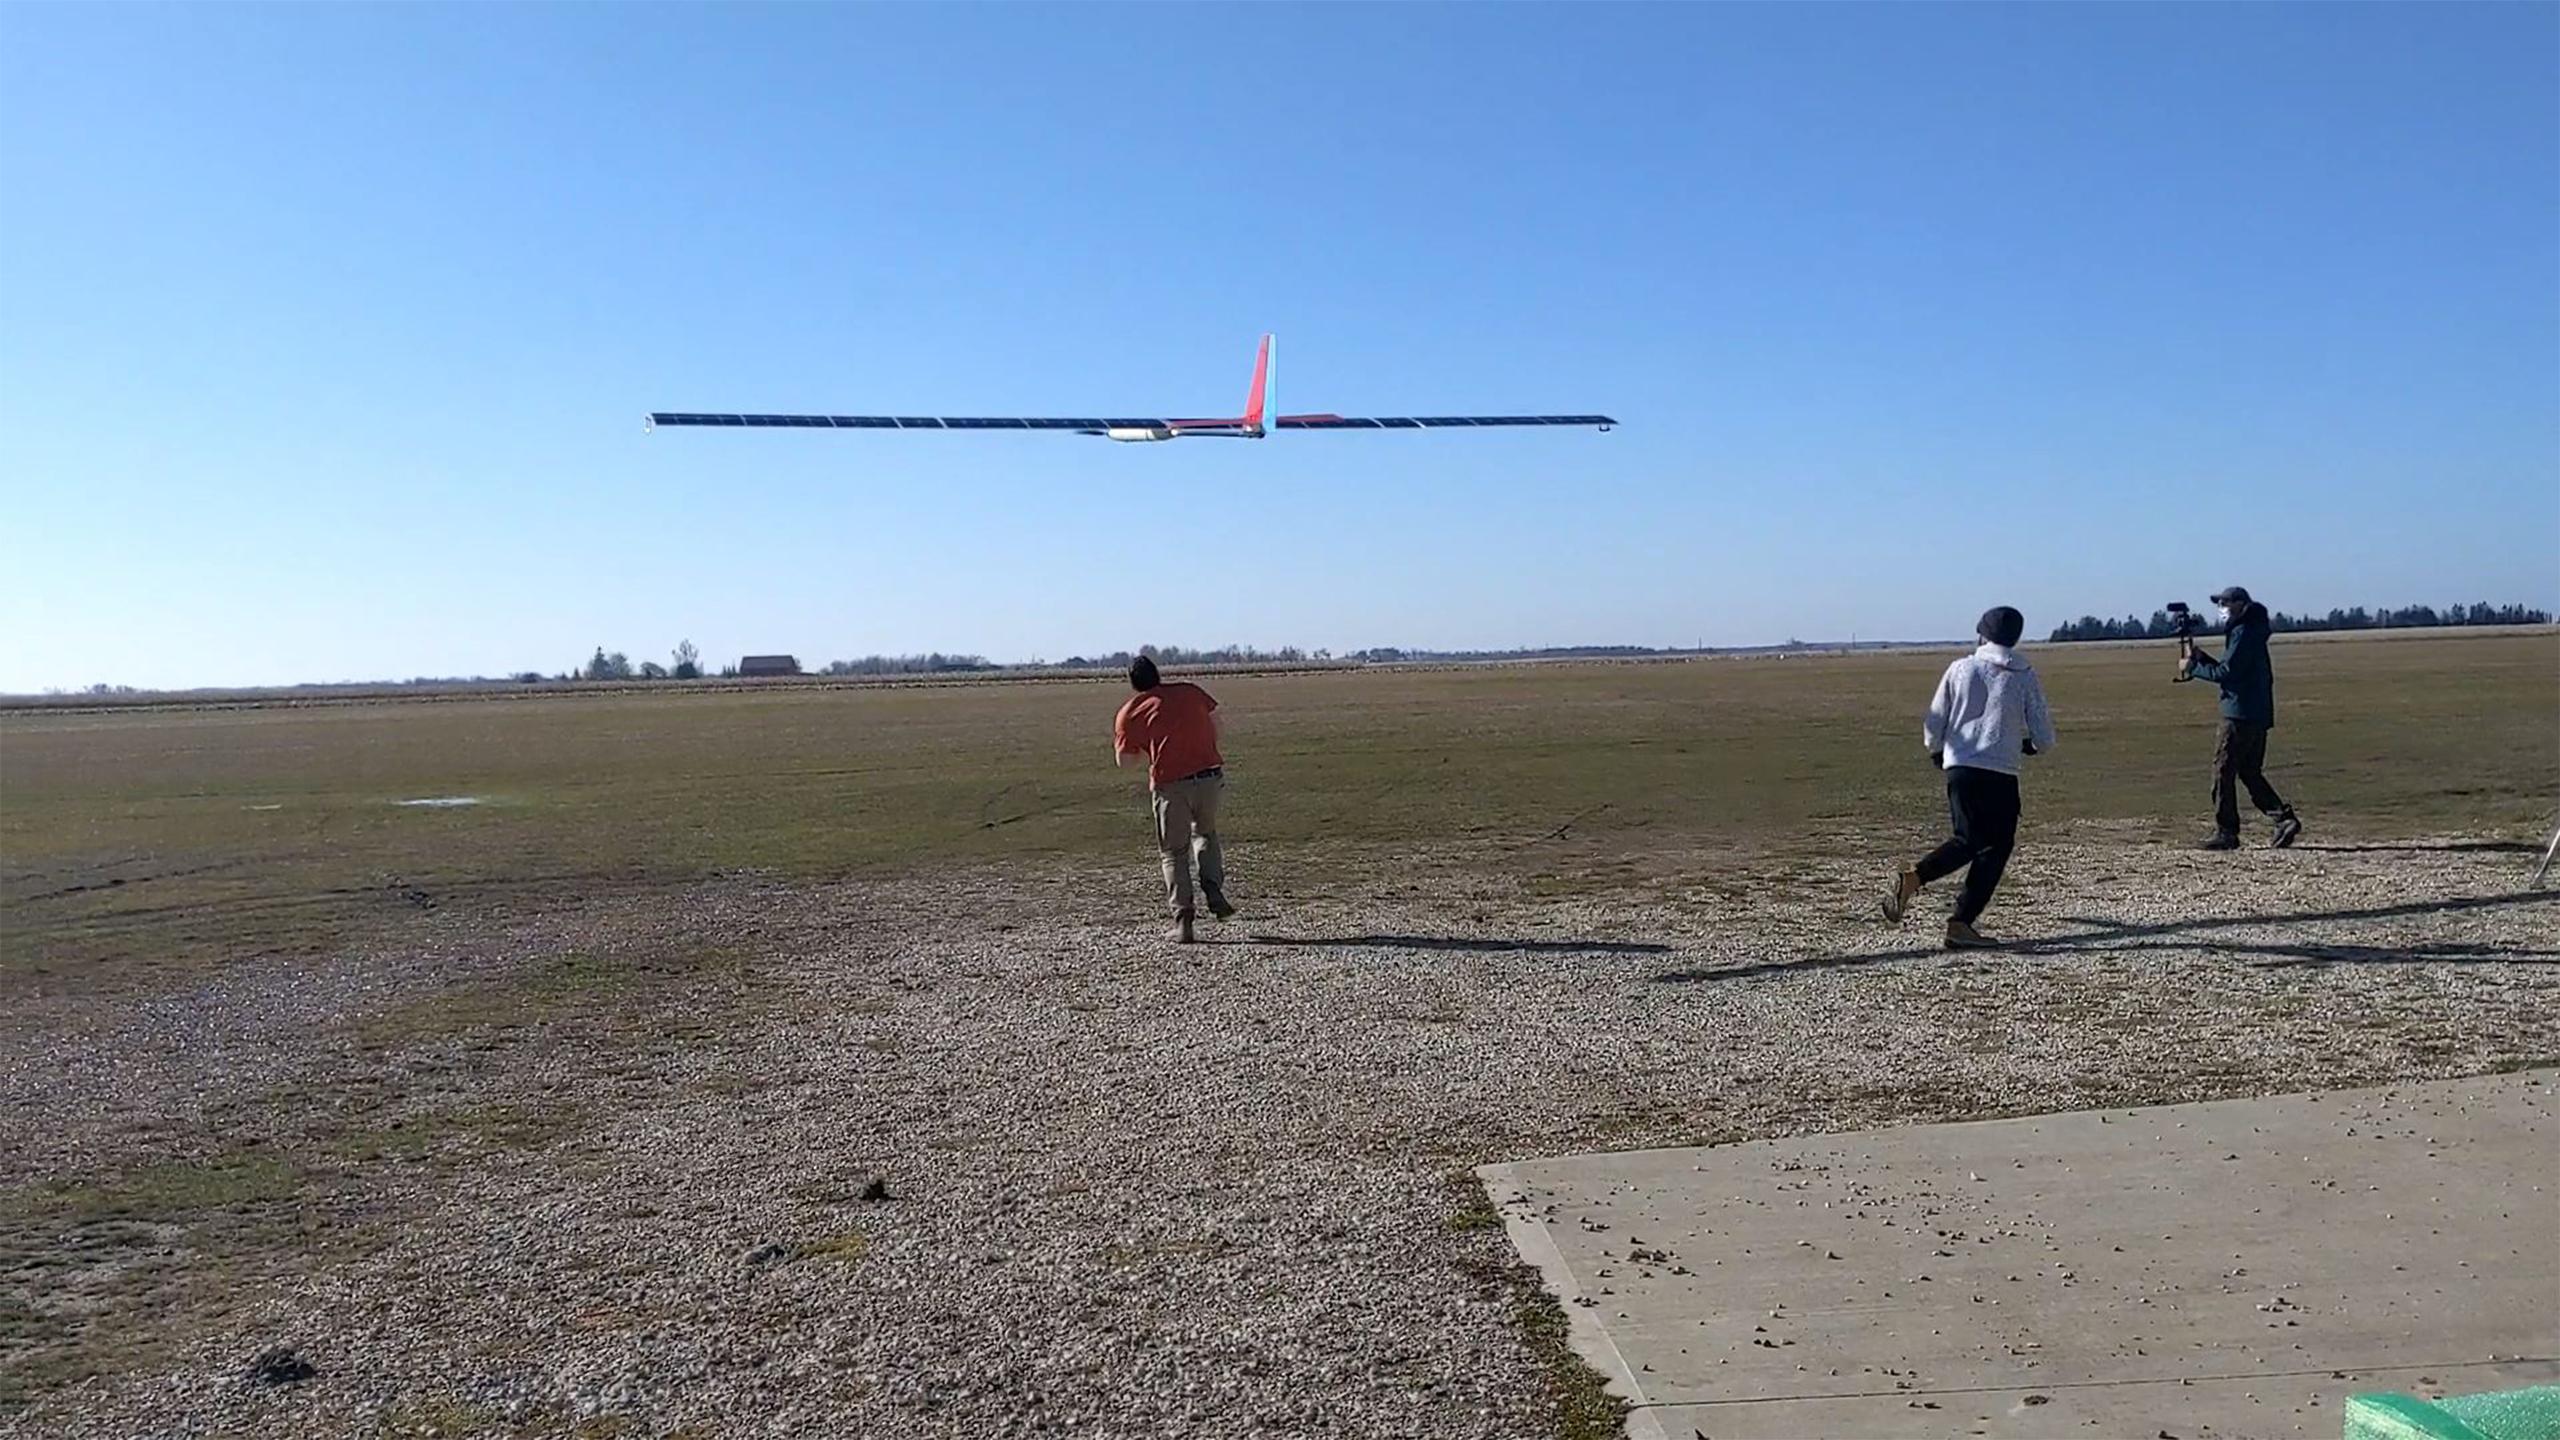 Glider flying above a field.